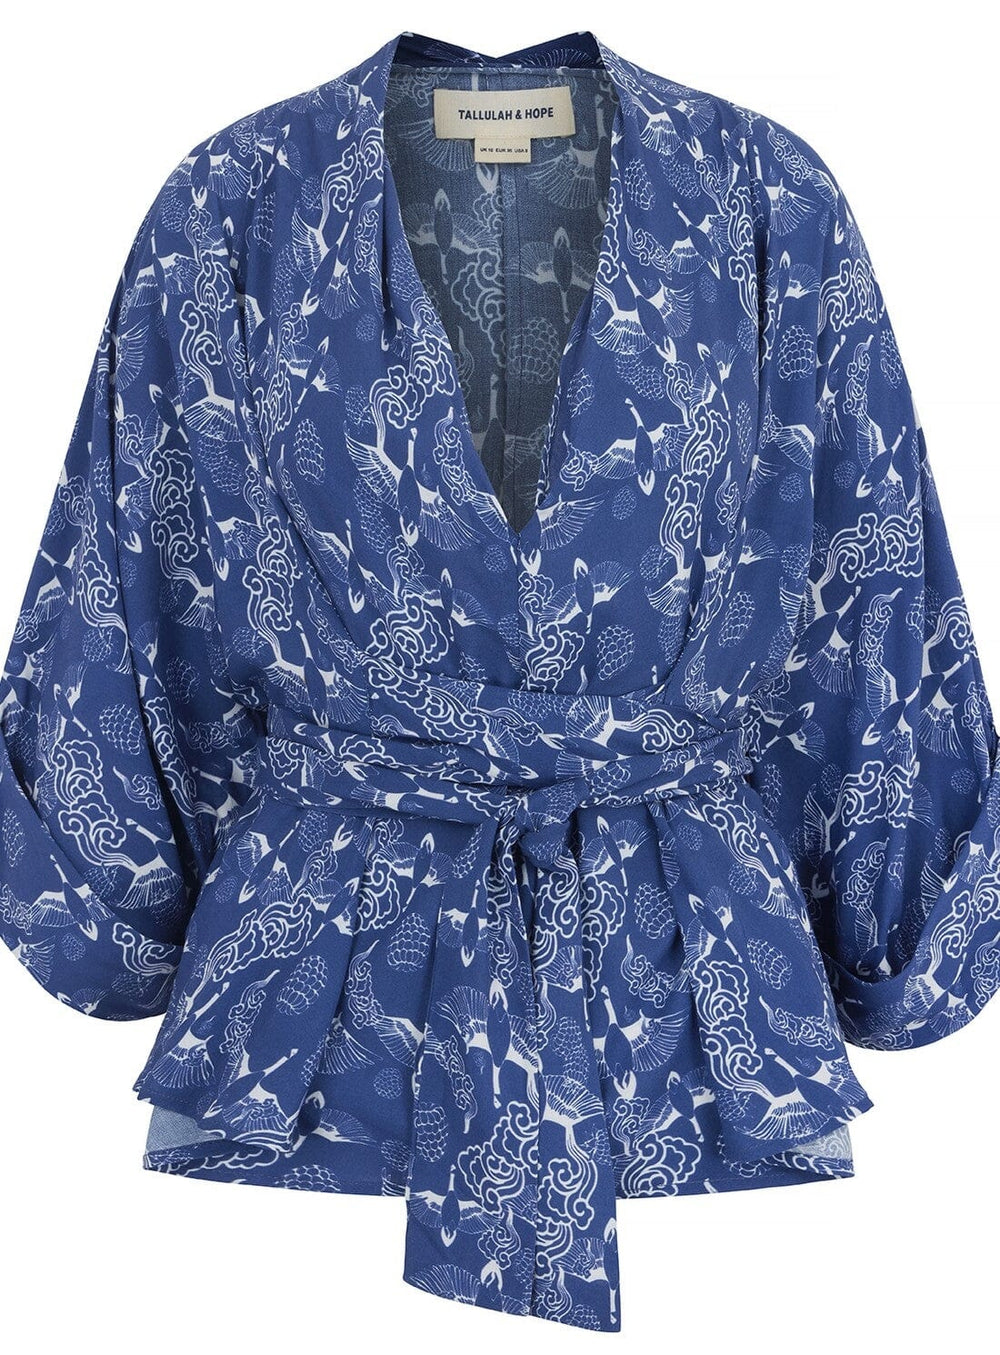 Gloria Blouse in Blue Geese Print Tops YBDFinds 